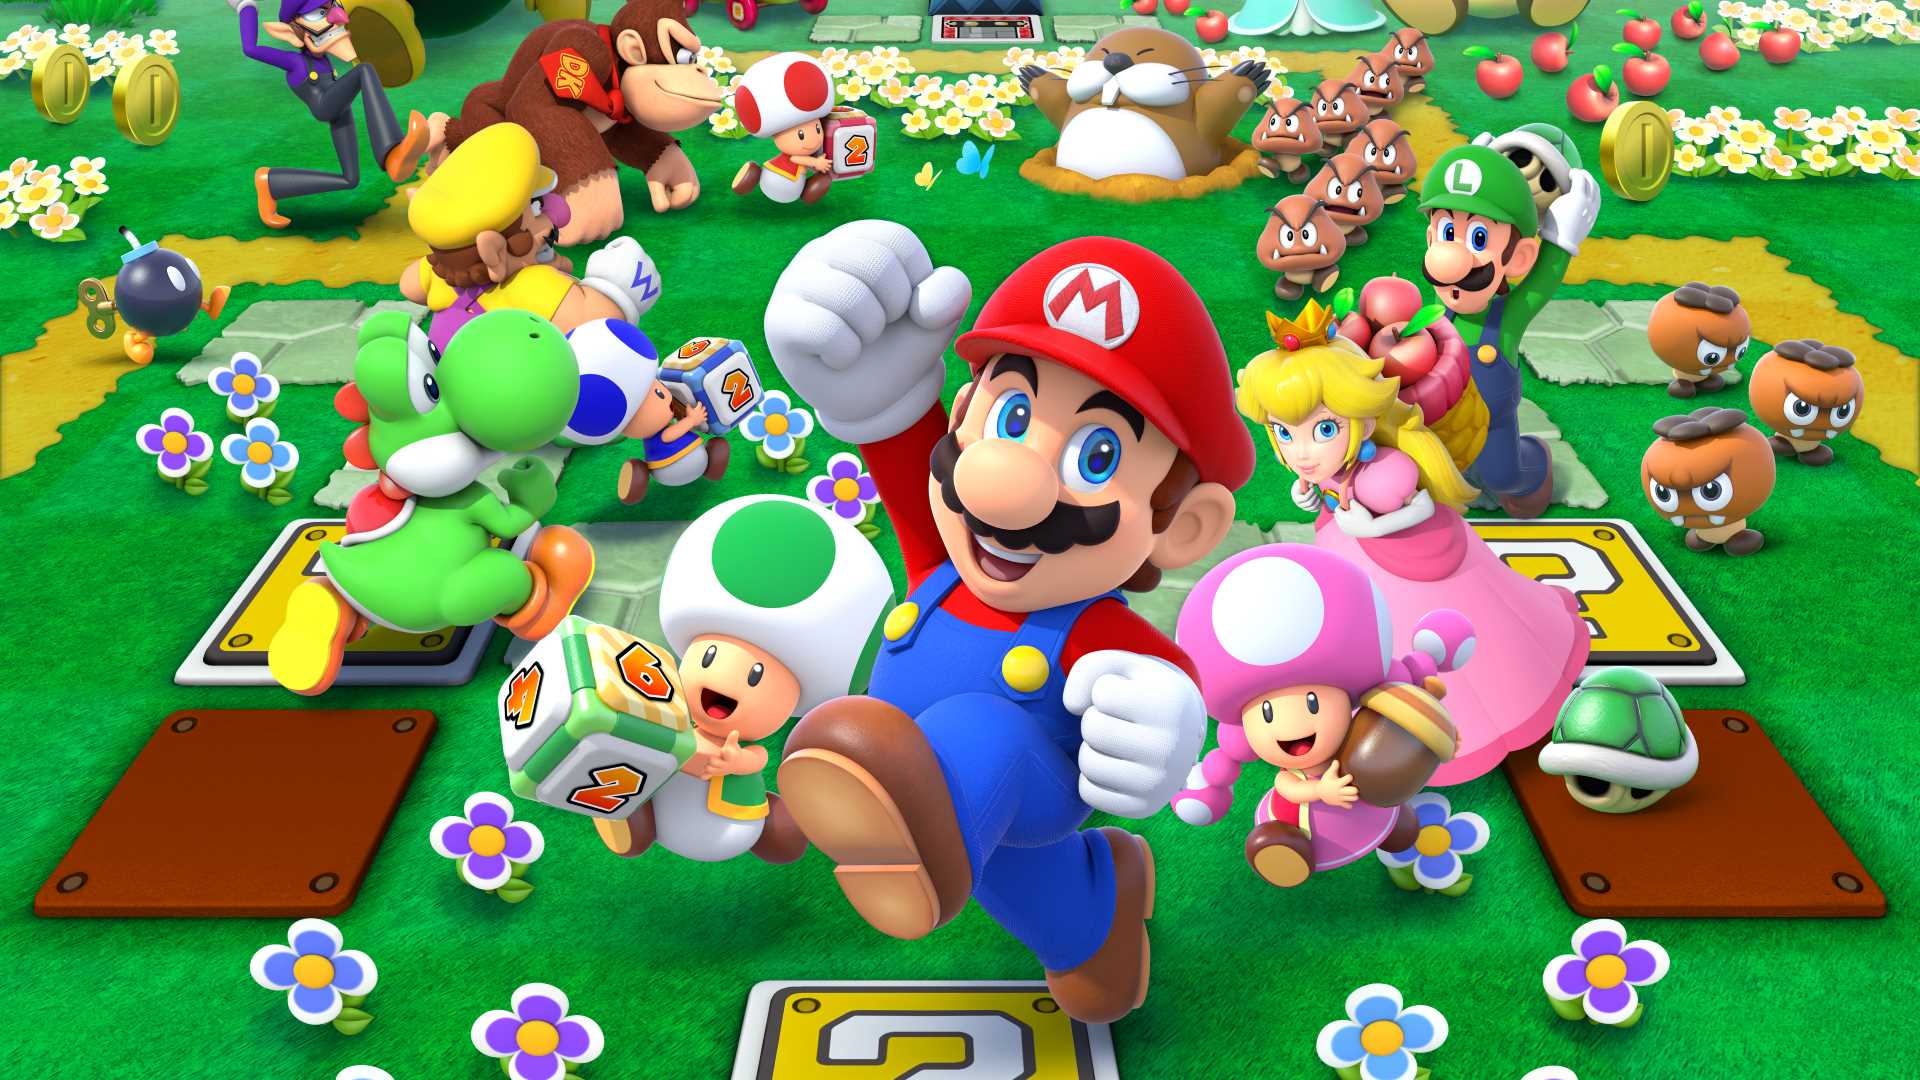 play mario party online free